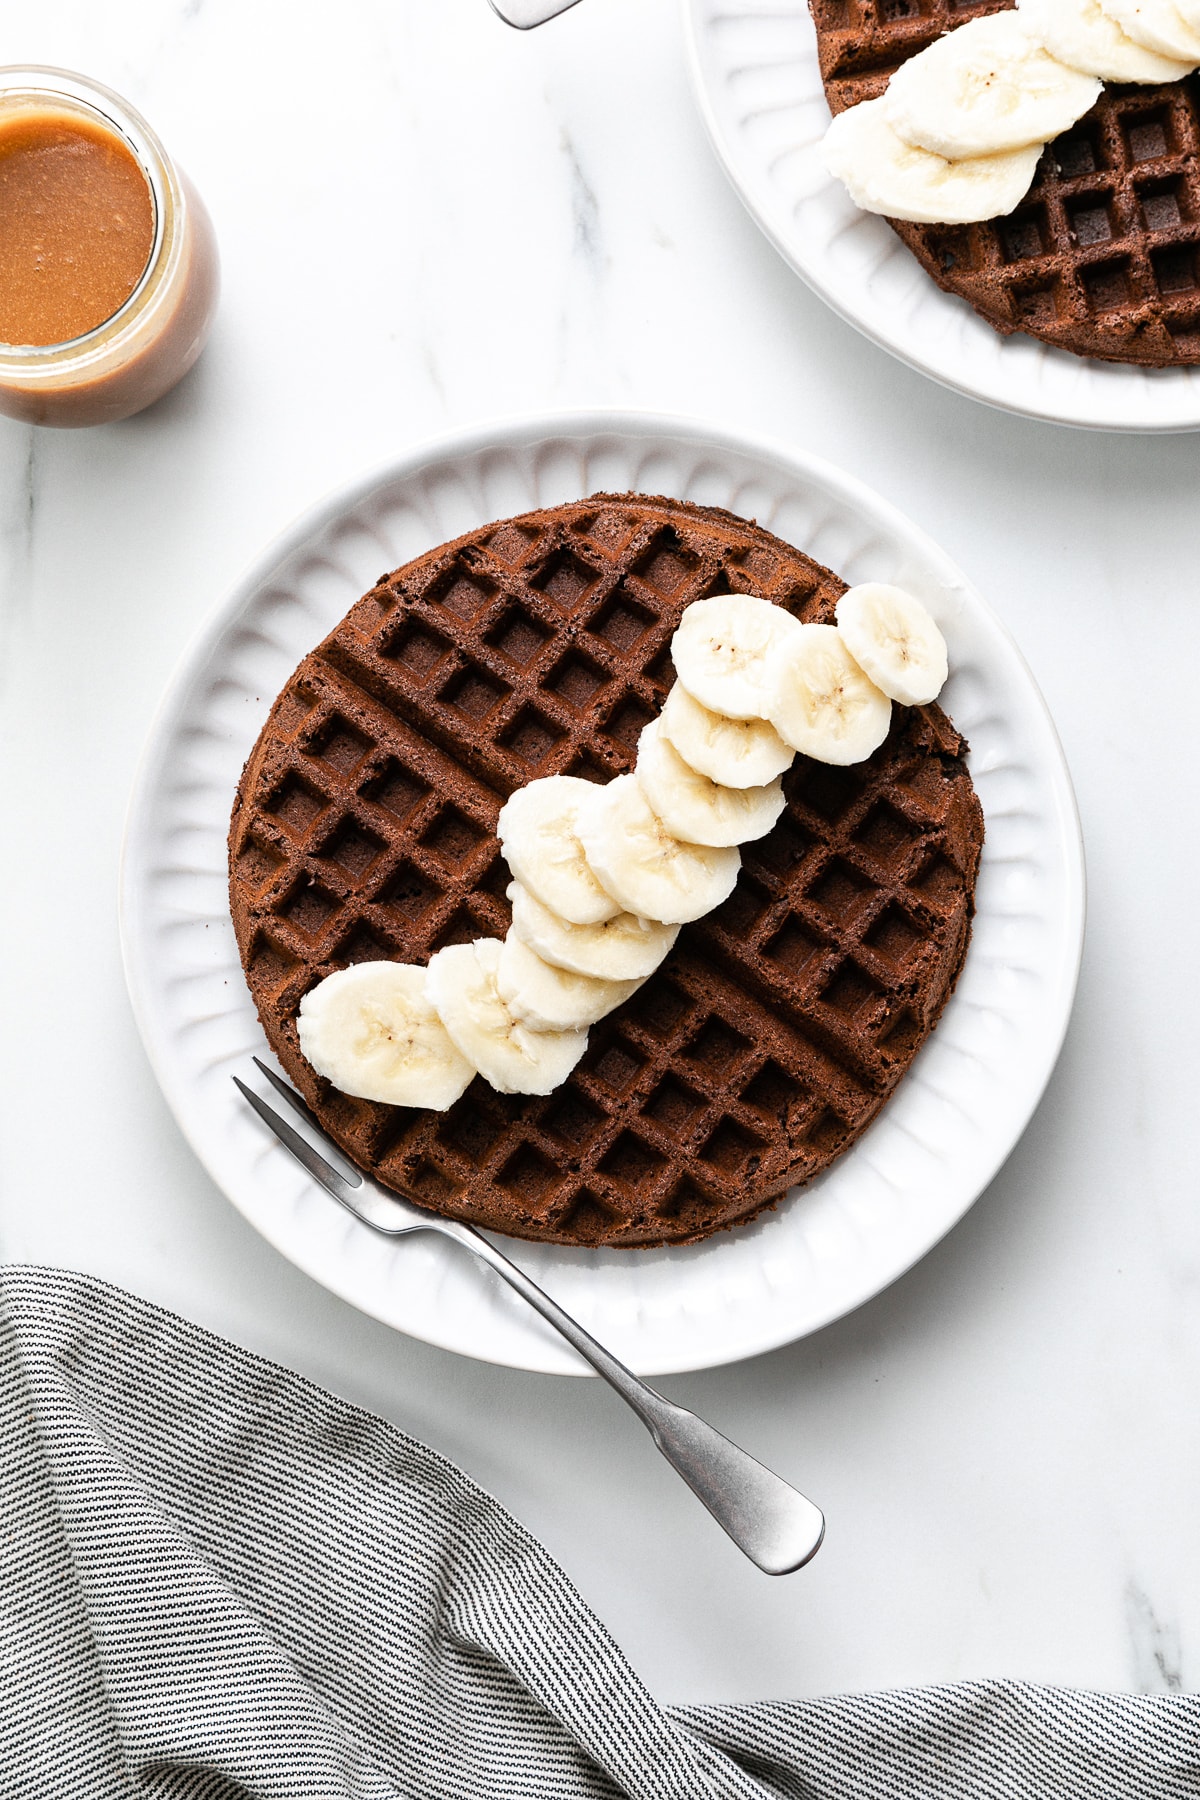 top down view of chocolate buckwheat waffle with items surrounding.